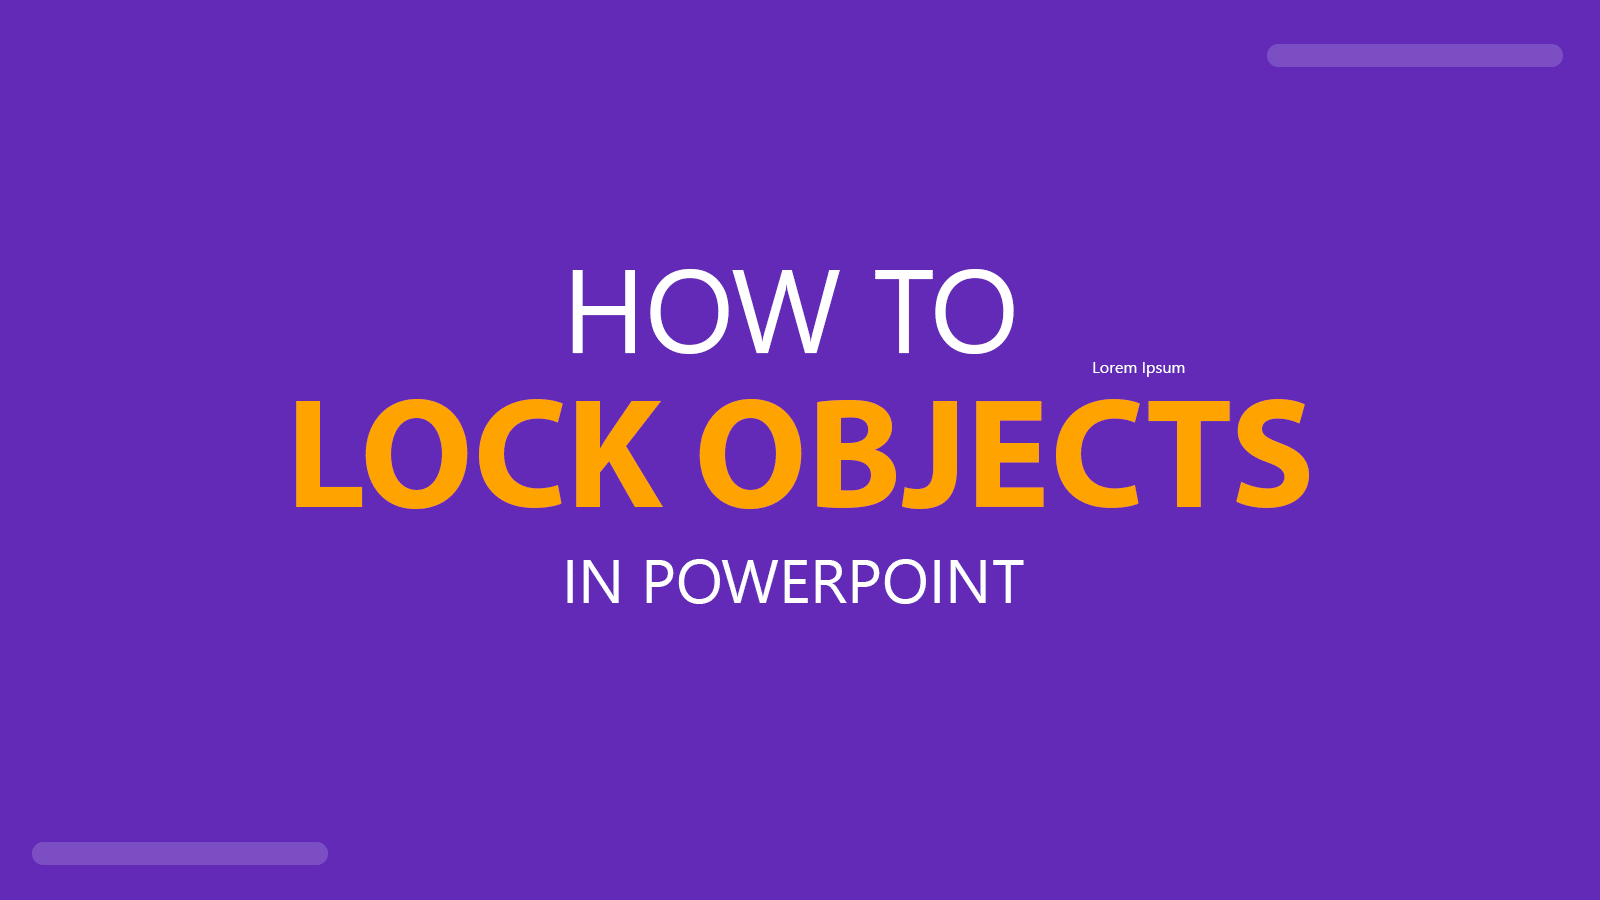 How to Lock Objects in PowerPoint? Using the PowerPoint Lock Object Feature